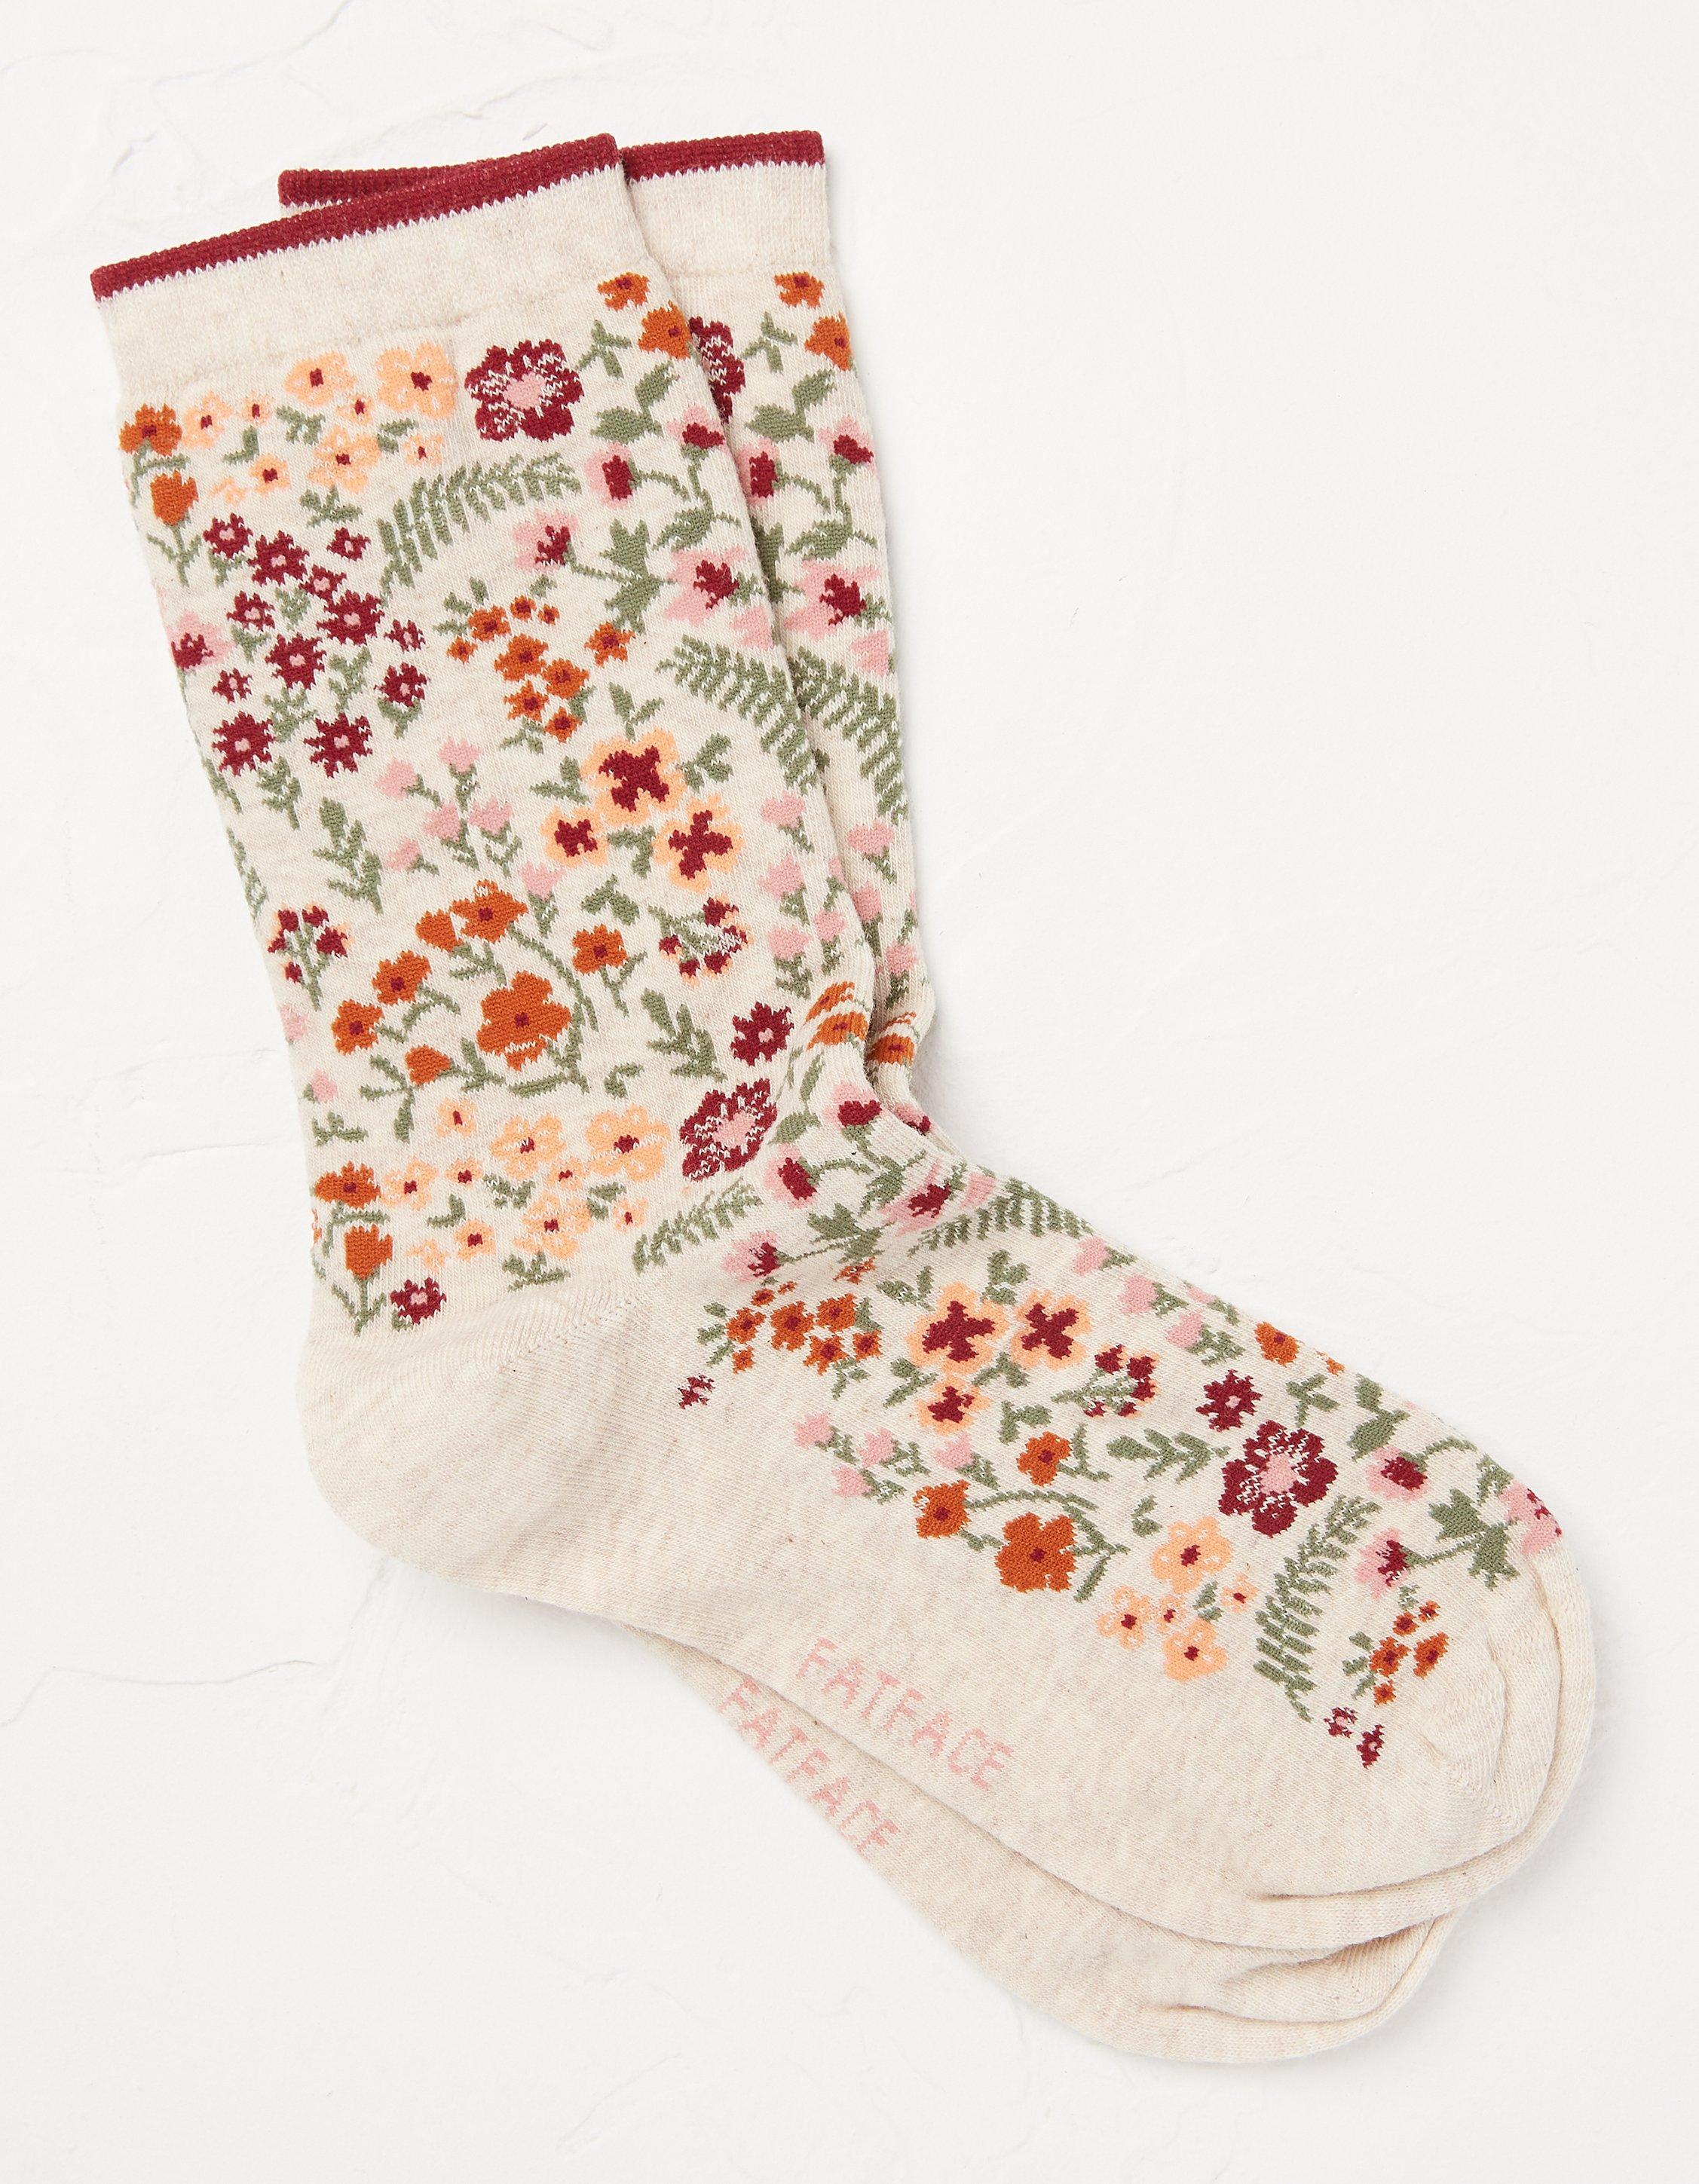 1 Pack Busy Floral Socks